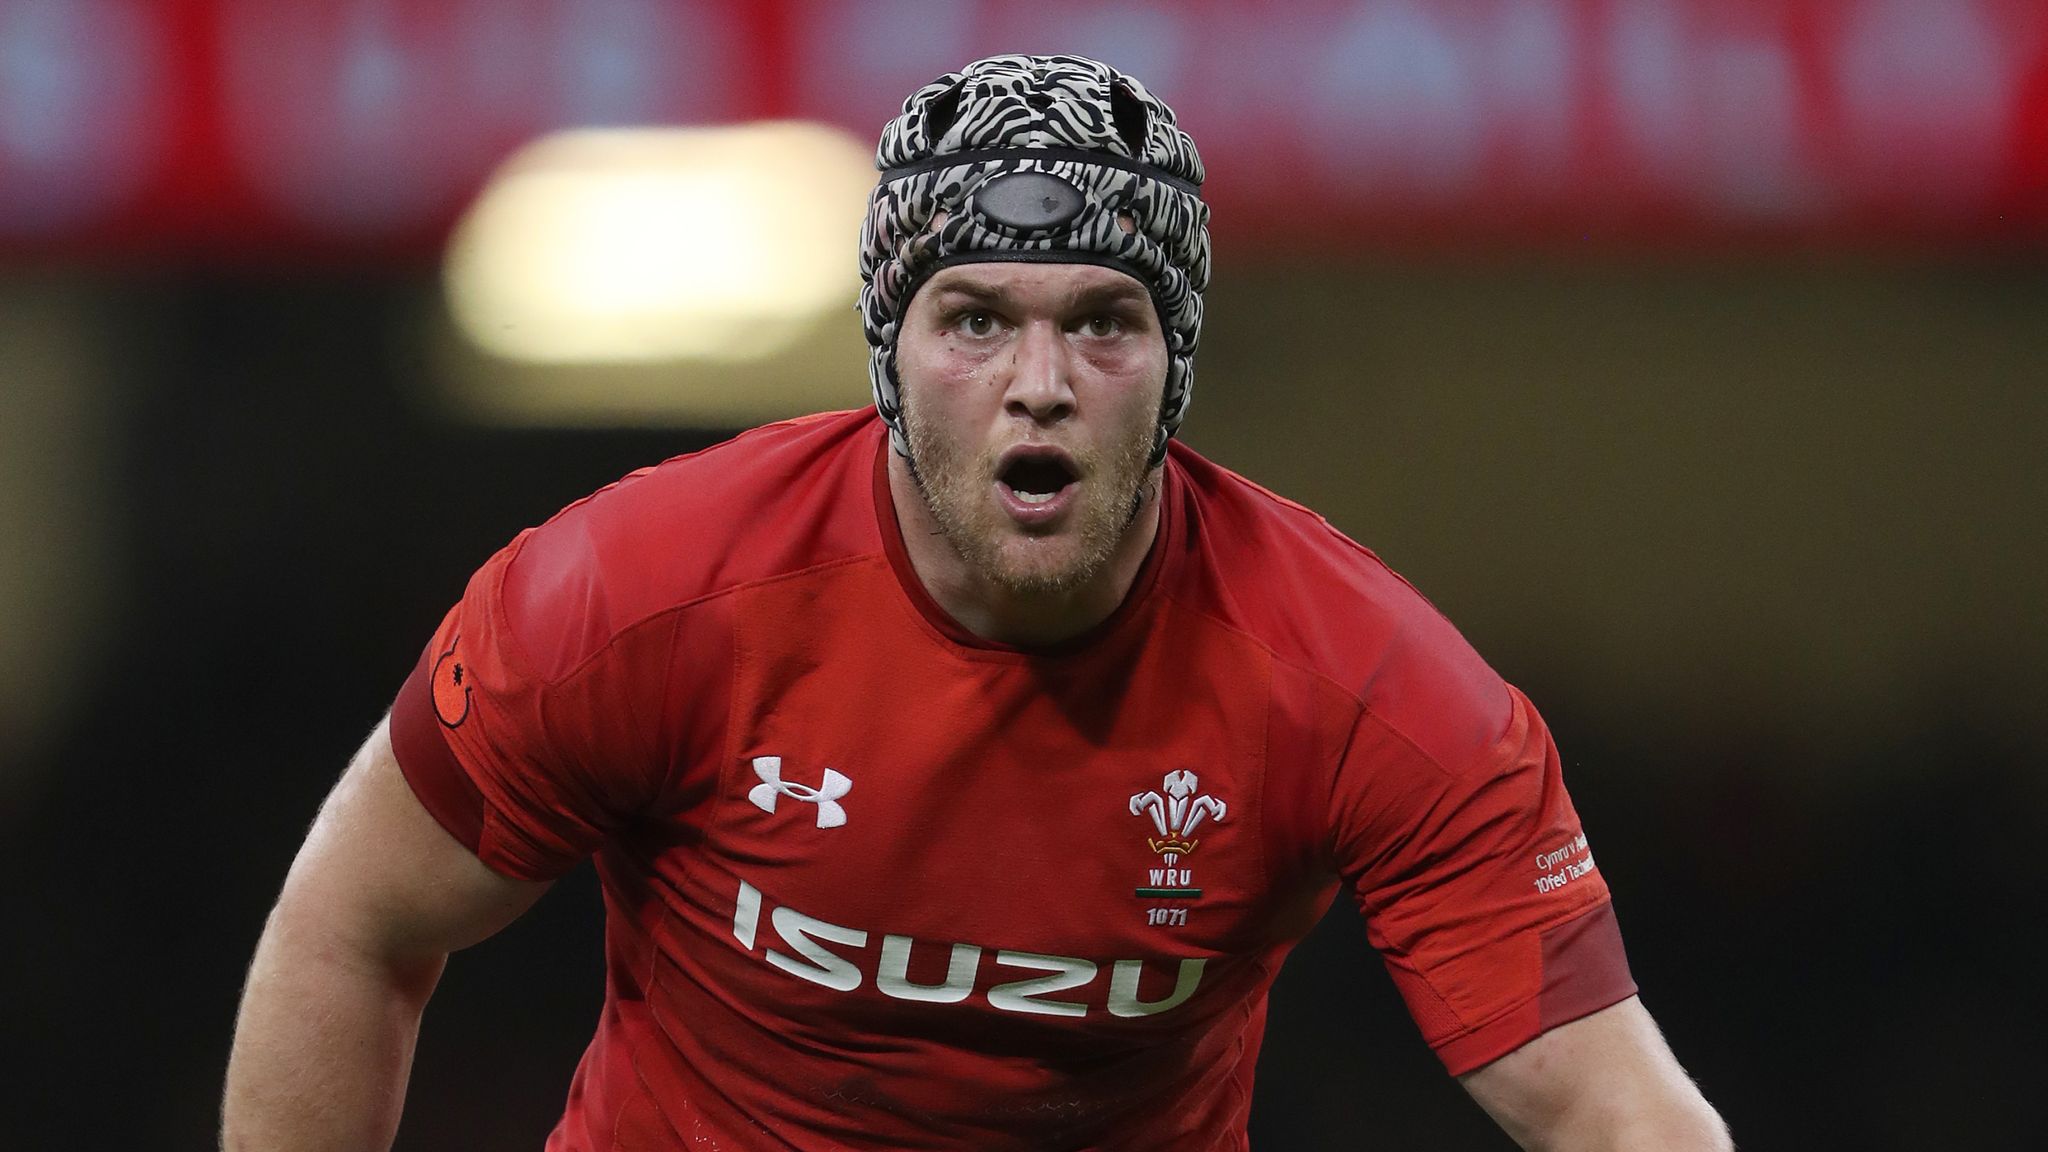 Six Nations 2021: Dan Lydiate starts for Wales against Ireland